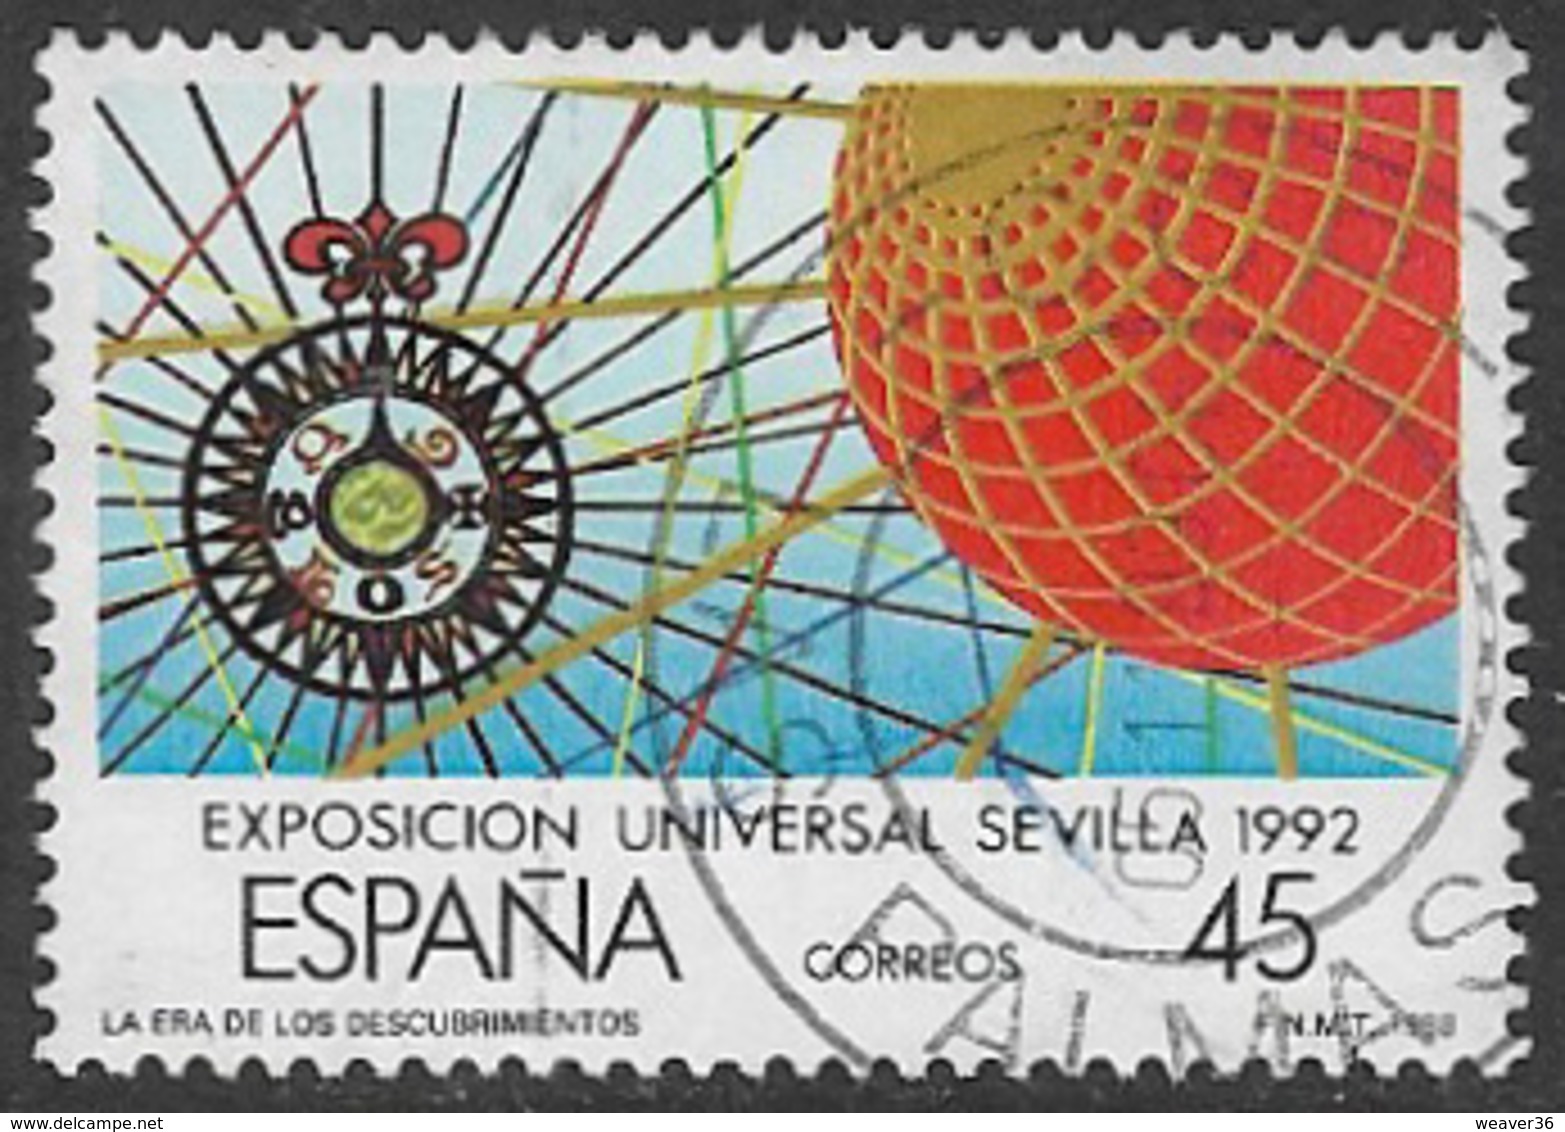 Spain SG2952 1988 Expo 92, Seville (3rd Issue) 45p Good/fine Used [40/32491/6D] - Used Stamps